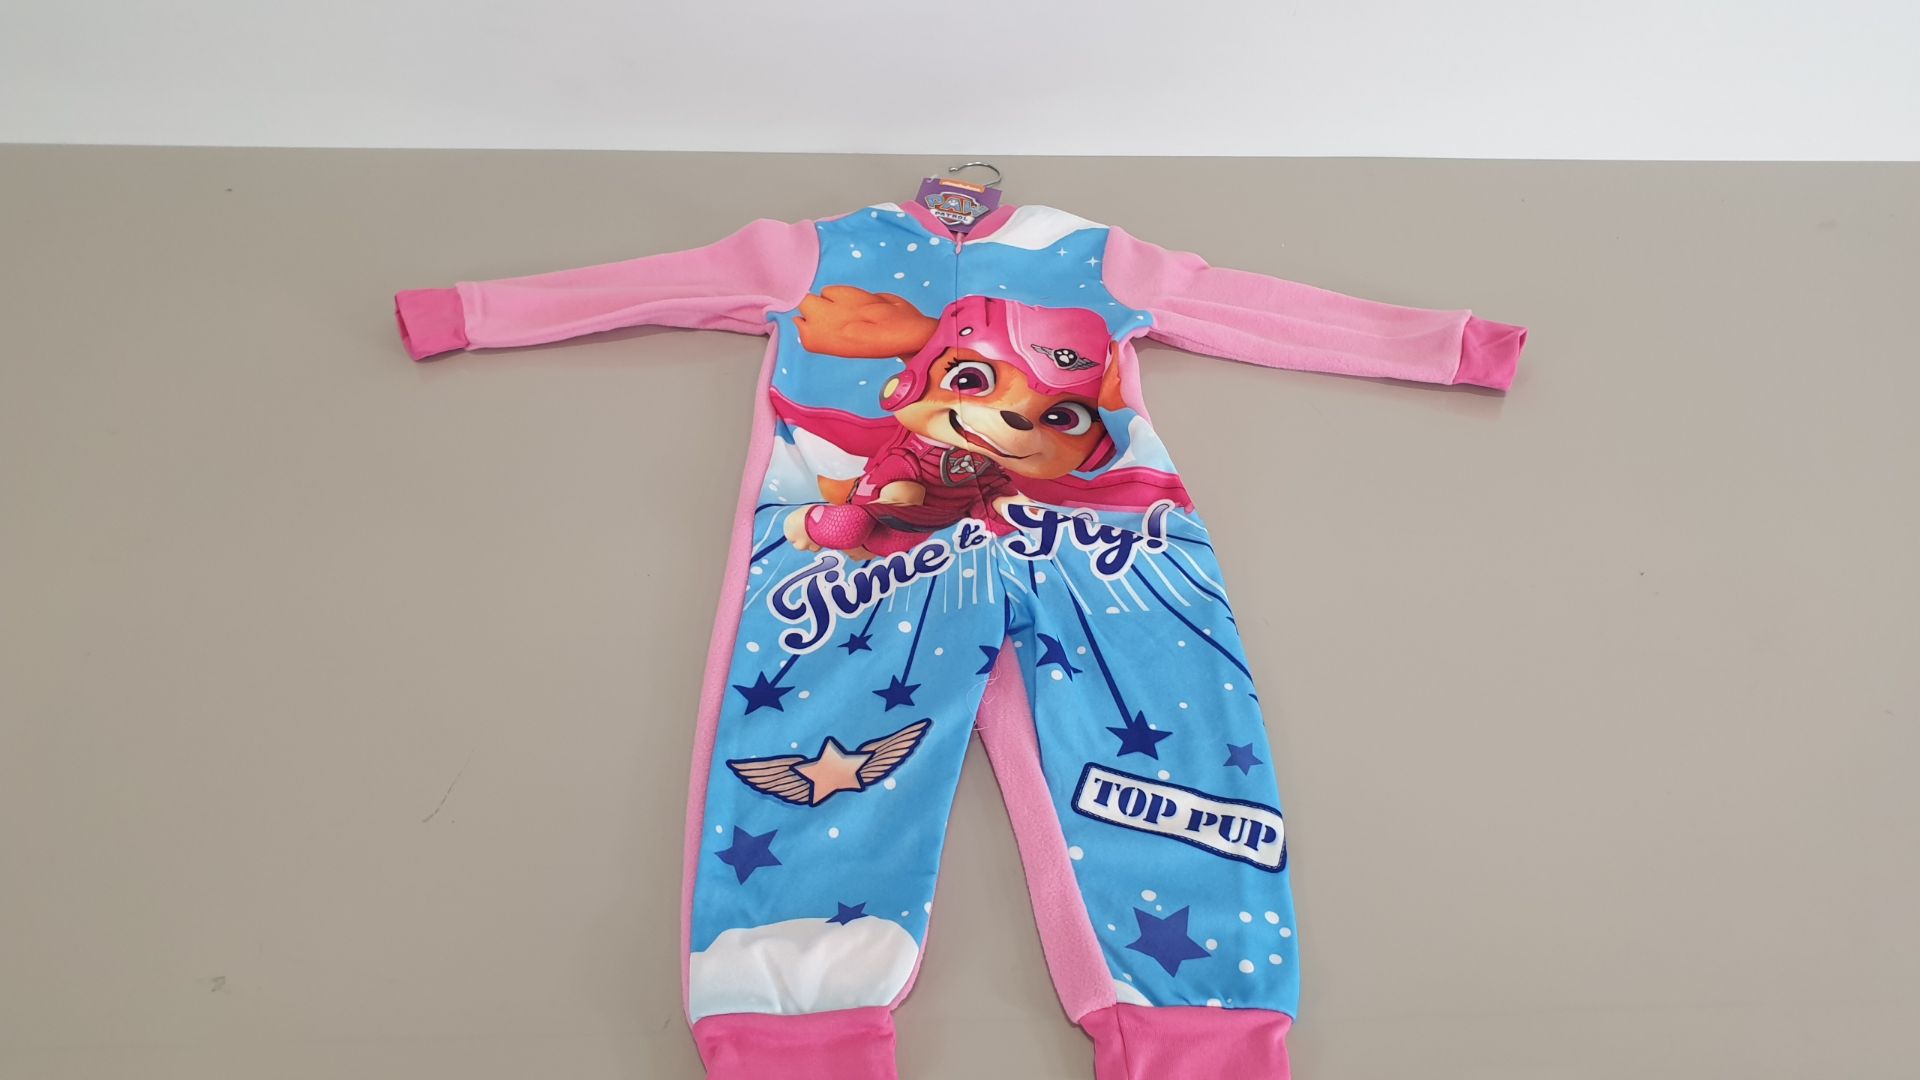 (LOT FOR THURSDAY 28TH MAY AUCTION) 9 X BRAND NEW NICKELODEON PAW PATROL ONESIES ASSORTED SIZES 18